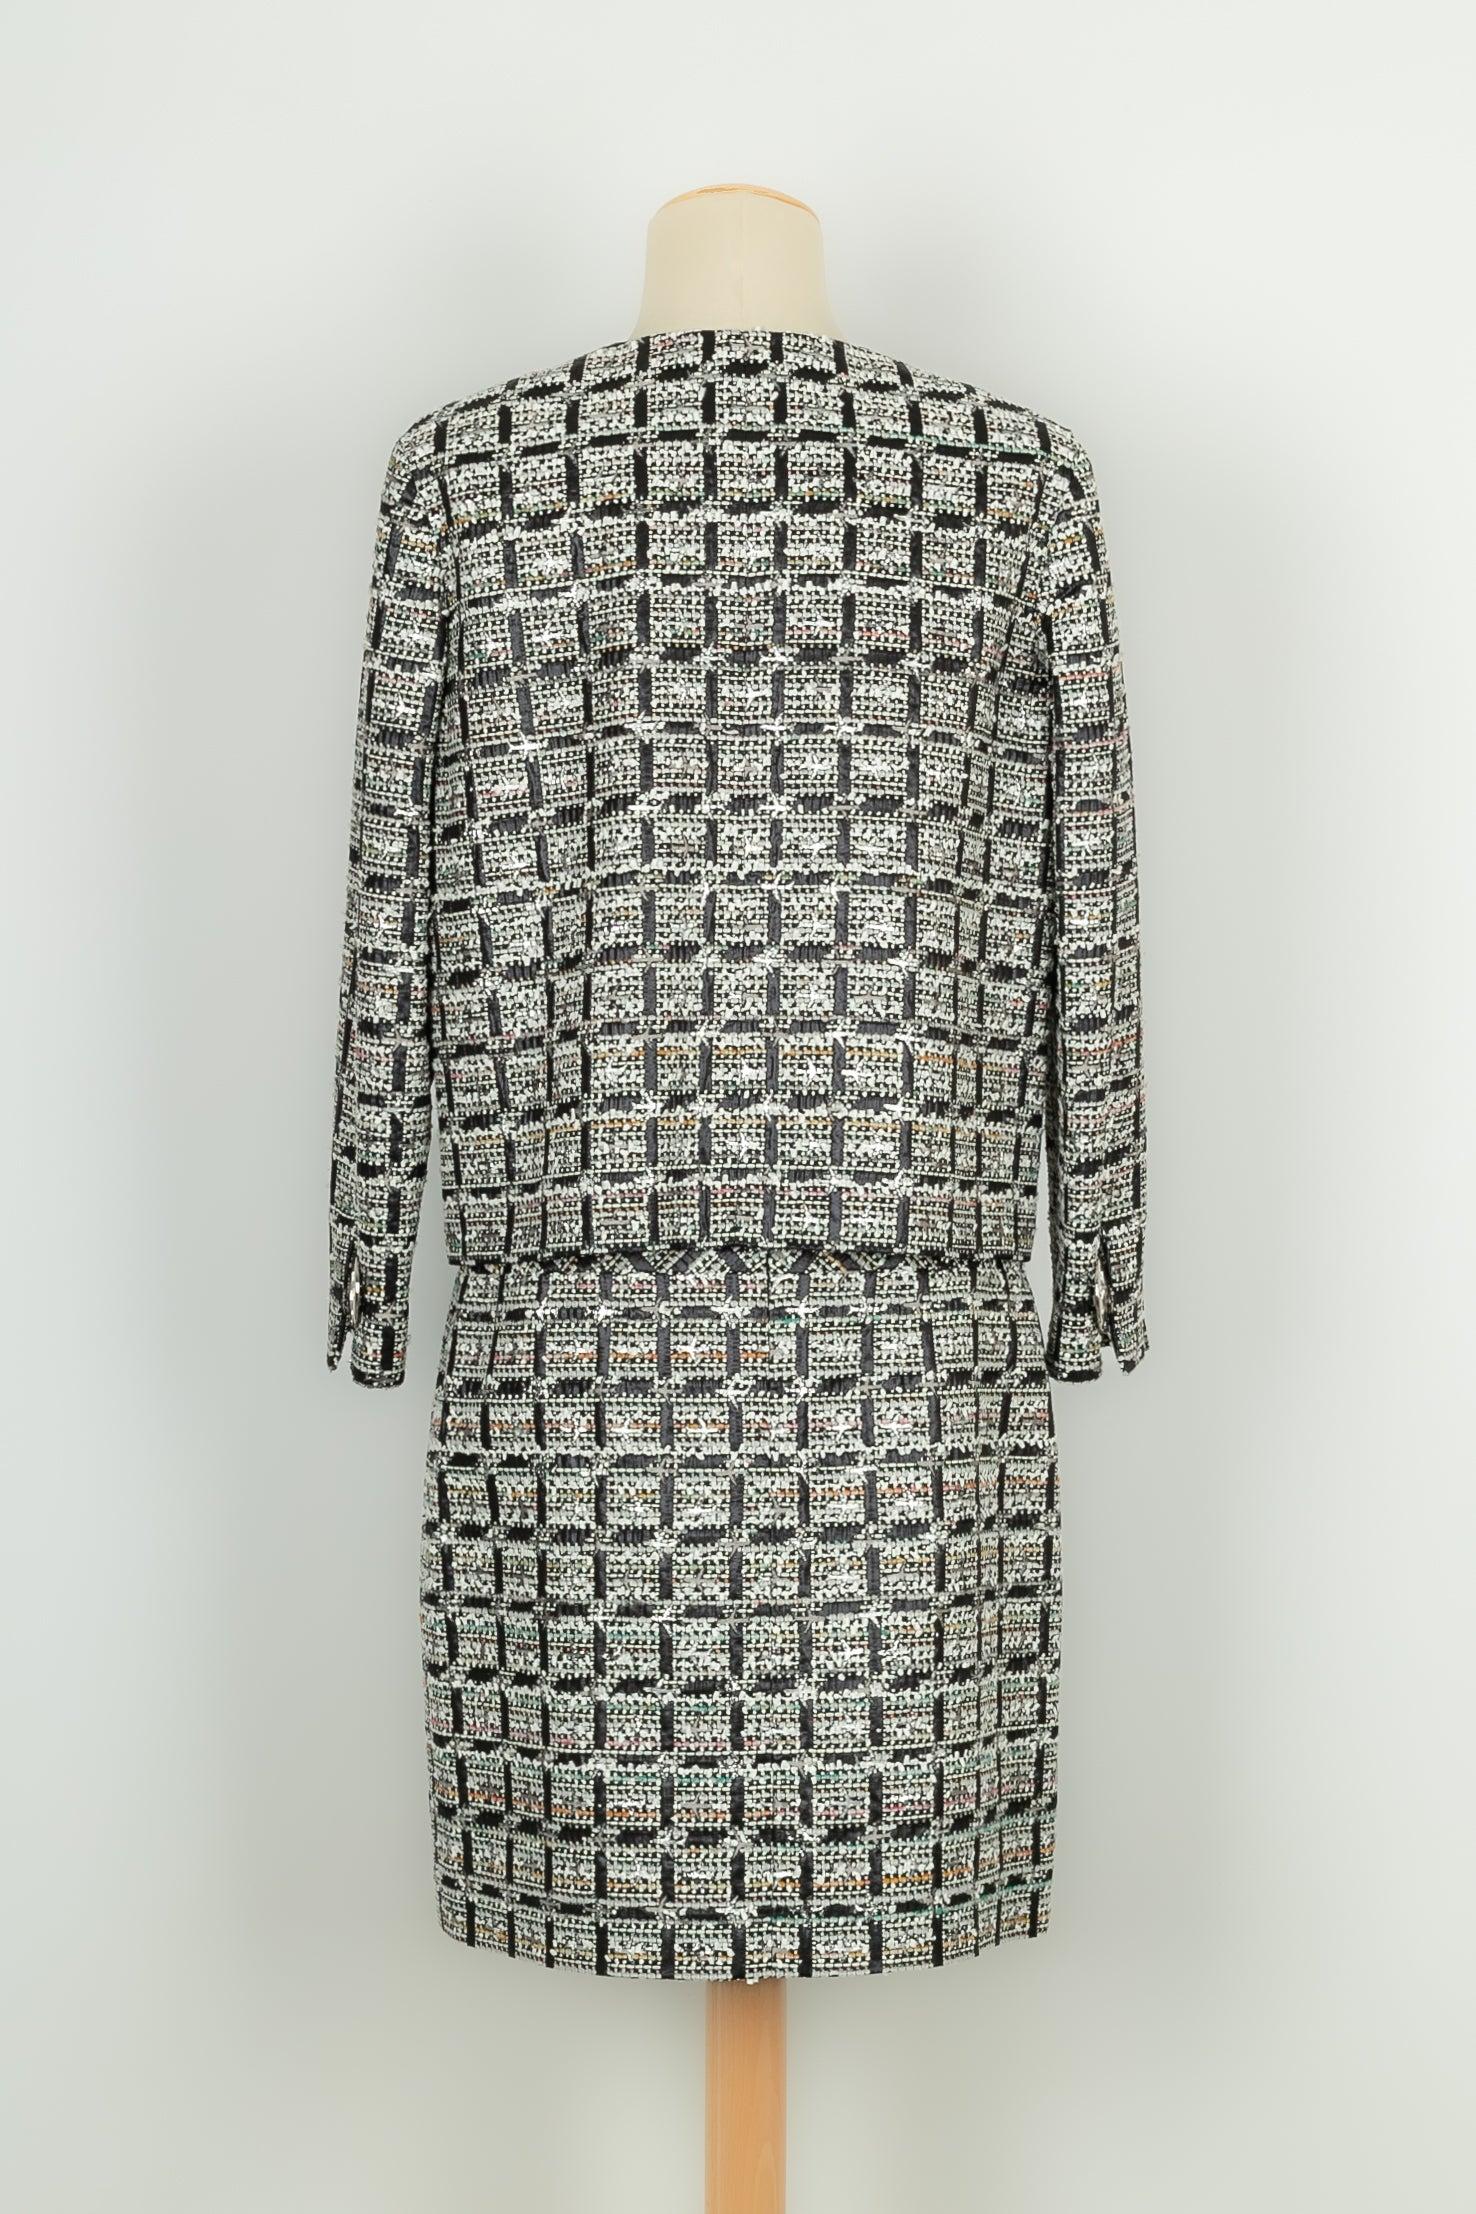 Chanel - (Made in France) Suit in tweed with silk lining in silver-grey tones. Summer 2016 Collection. Size 40.

Additional information:
Condition: Very good condition
Dimensions: Jacket: Shoulder width: 40 cm - Sleeve length: 59 cm - Length: 58 cm